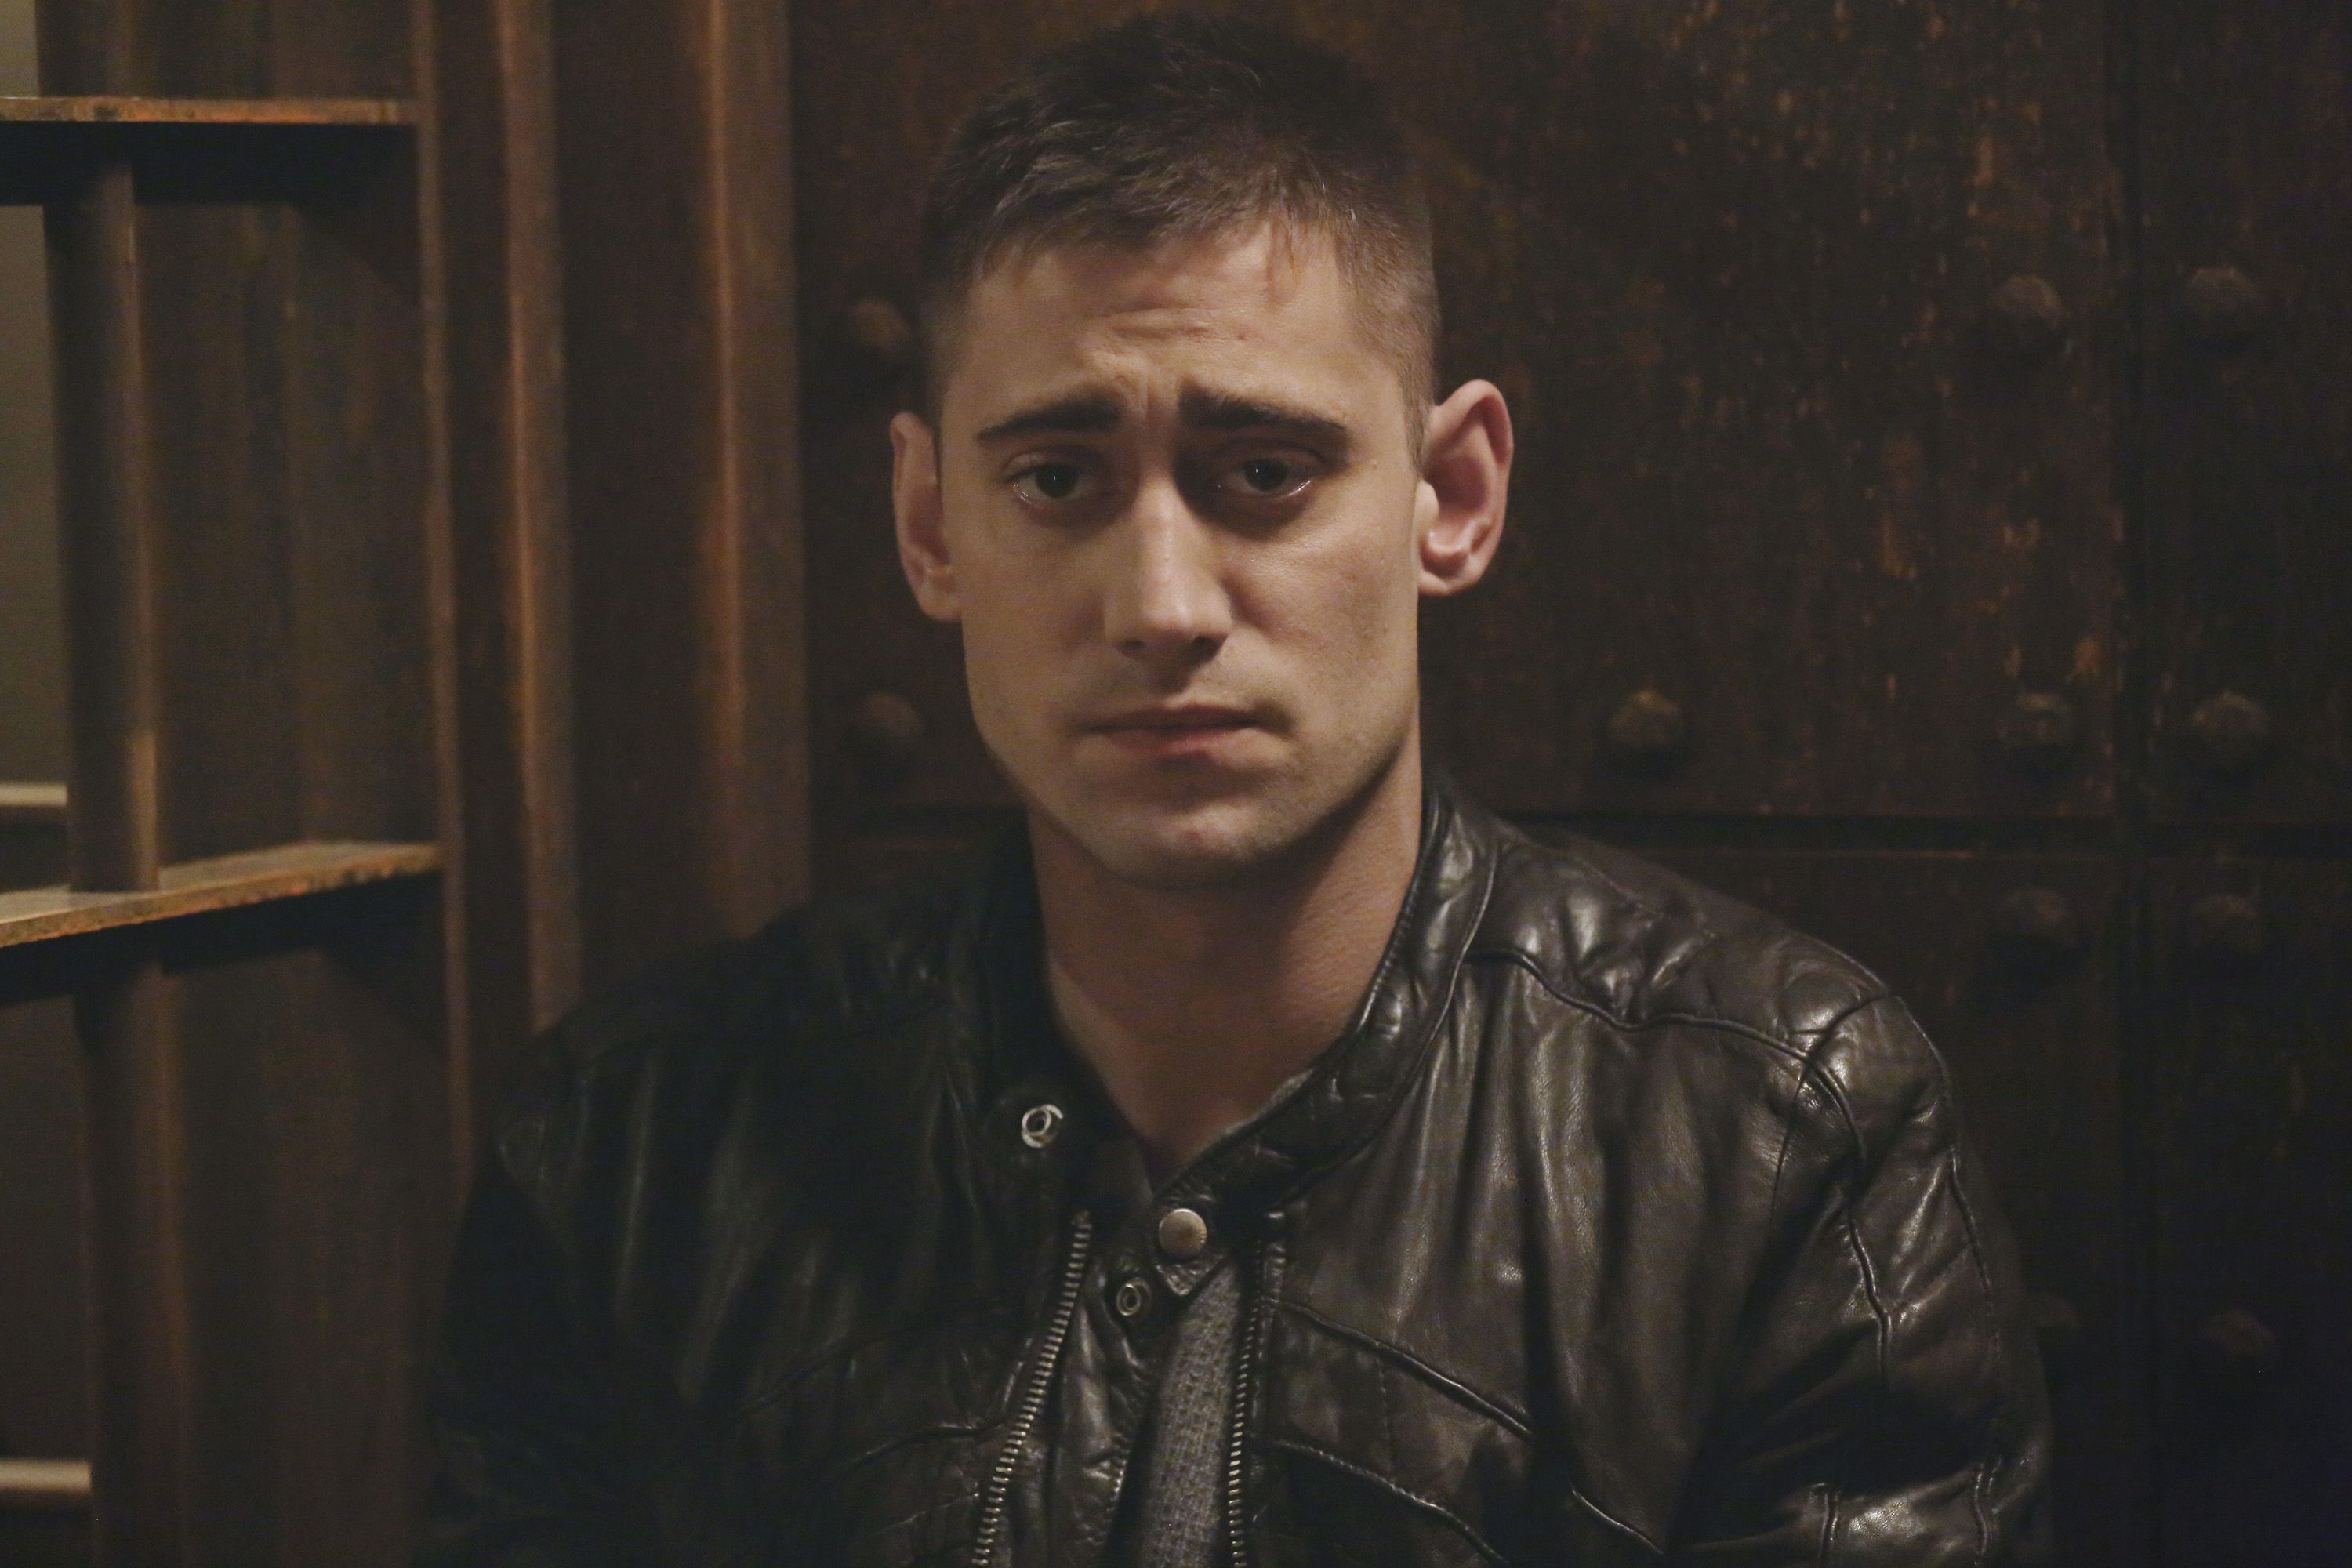 Autogrammfoto ² Once Upon A Time .. Michael Socha alias Will Scarlet 